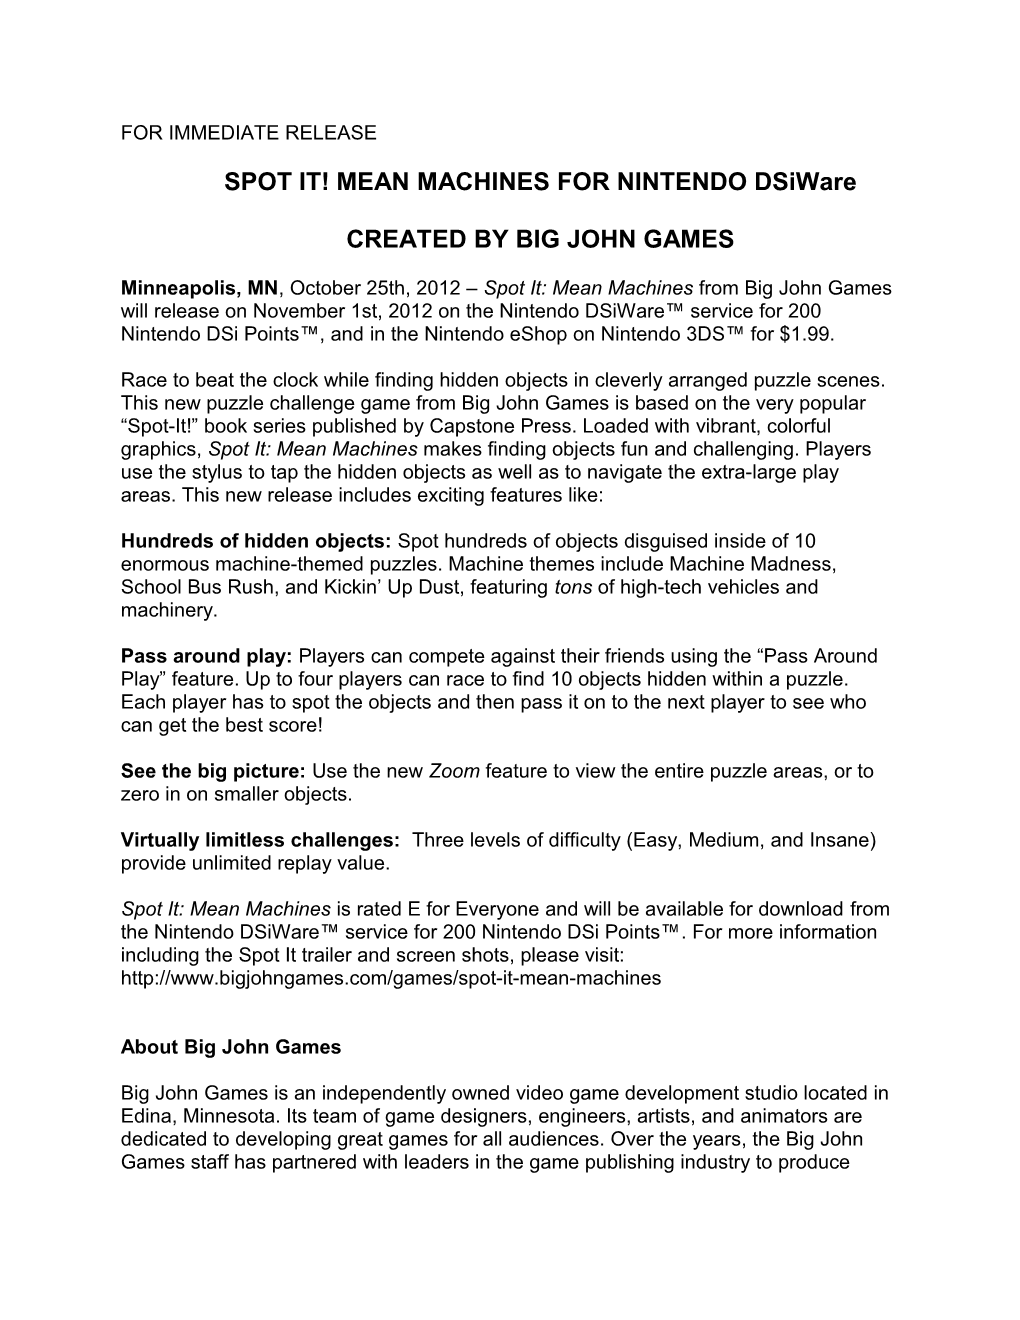 SPOT IT! MEAN MACHINES for NINTENDO Dsiware